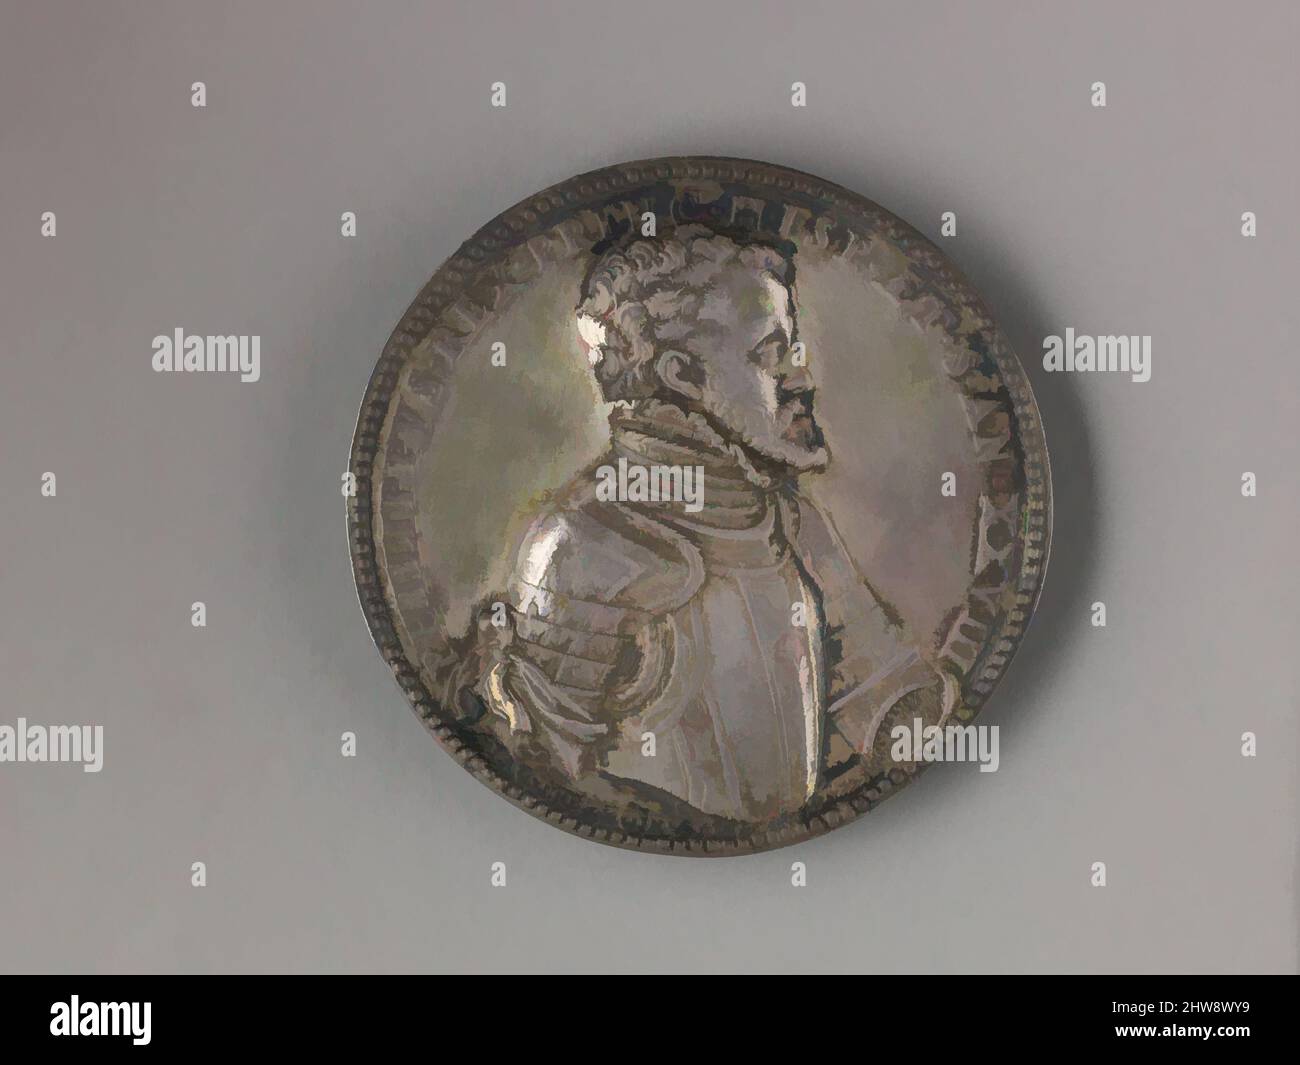 Art inspired by Portrait medal of Philip II (obverse); Mary Tudor Queen of England (reverse), 1555, Silver/copper alloy with traces of lead., Diam. 6.6 cm, wt. 98.96 g., Medals, Jacopo Nizolla da Trezzo (Italian, Milan 1515/19–1589 Madrid), The obverse bears a portrait of Philip II, Classic works modernized by Artotop with a splash of modernity. Shapes, color and value, eye-catching visual impact on art. Emotions through freedom of artworks in a contemporary way. A timeless message pursuing a wildly creative new direction. Artists turning to the digital medium and creating the Artotop NFT Stock Photo